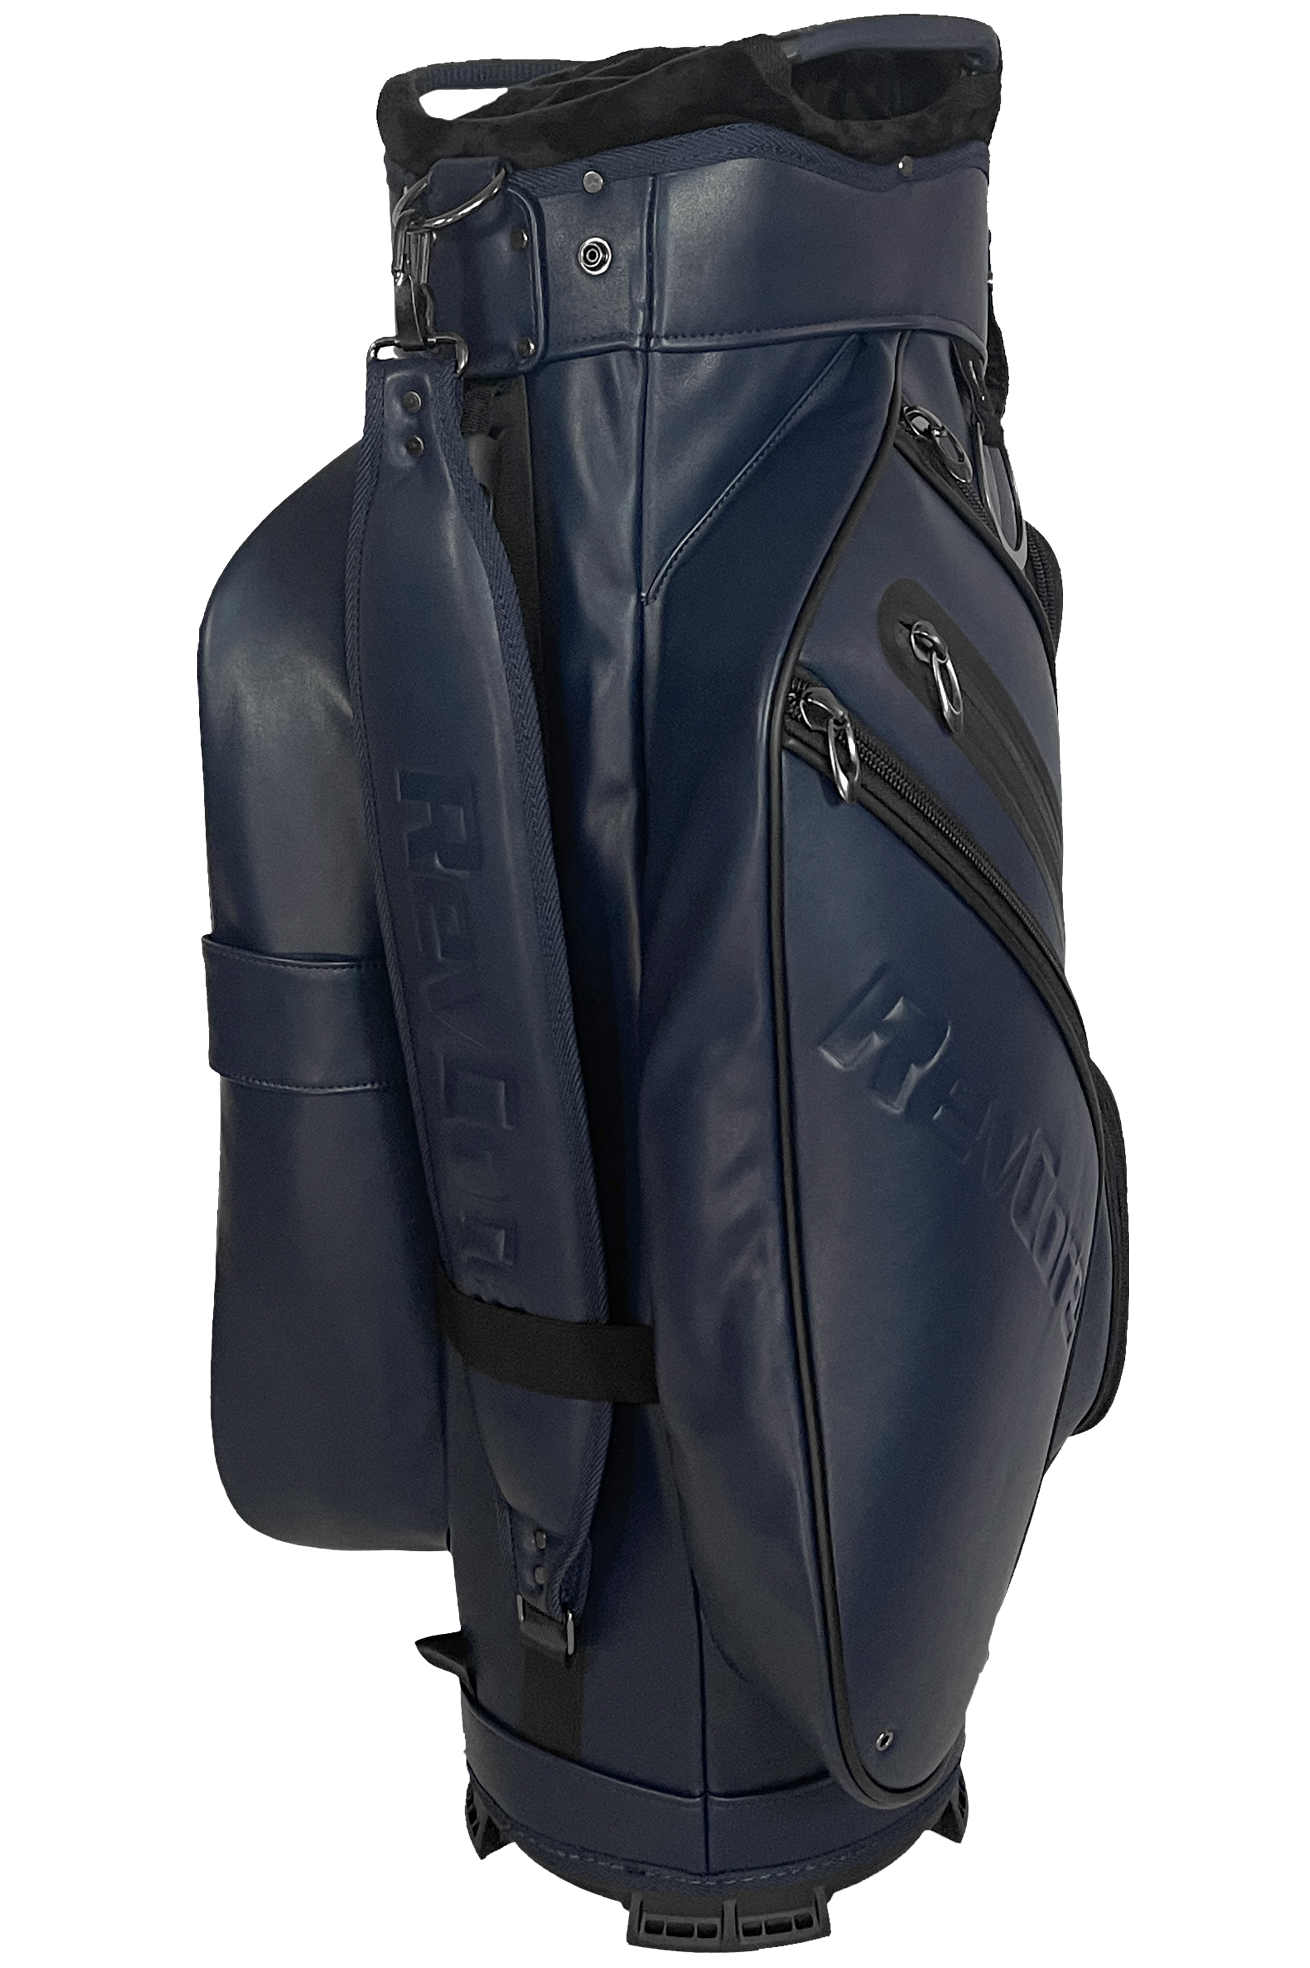 revcore blue cart golf bag by caddydaddy back view